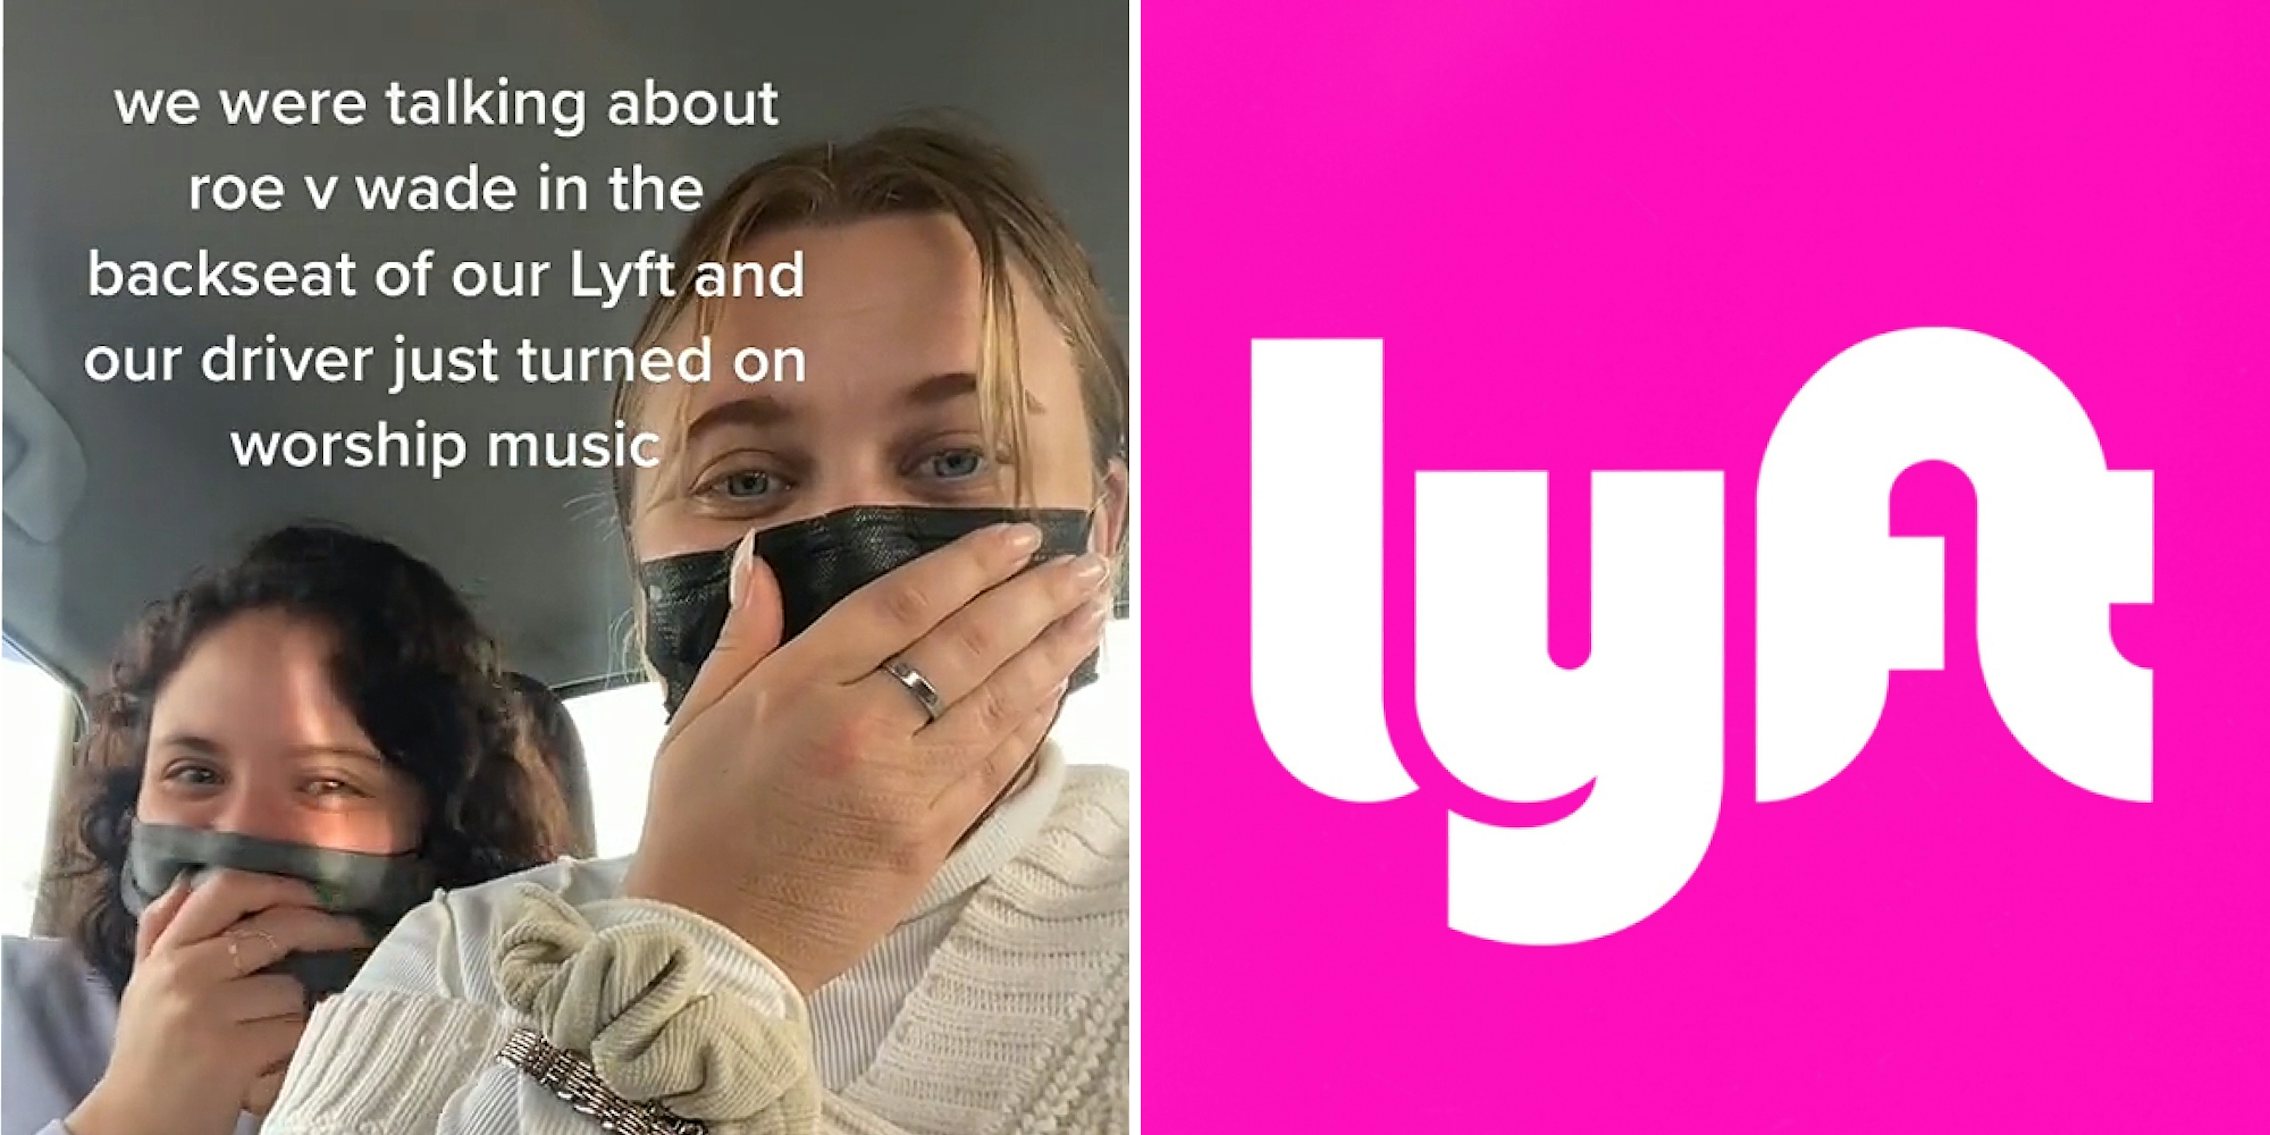 Two women in car hands on faces caption 'we were talking about roe v wade in the backseat of our Lyft and our driver just turned on worship music' (l) Lyft logo on pink background (r)